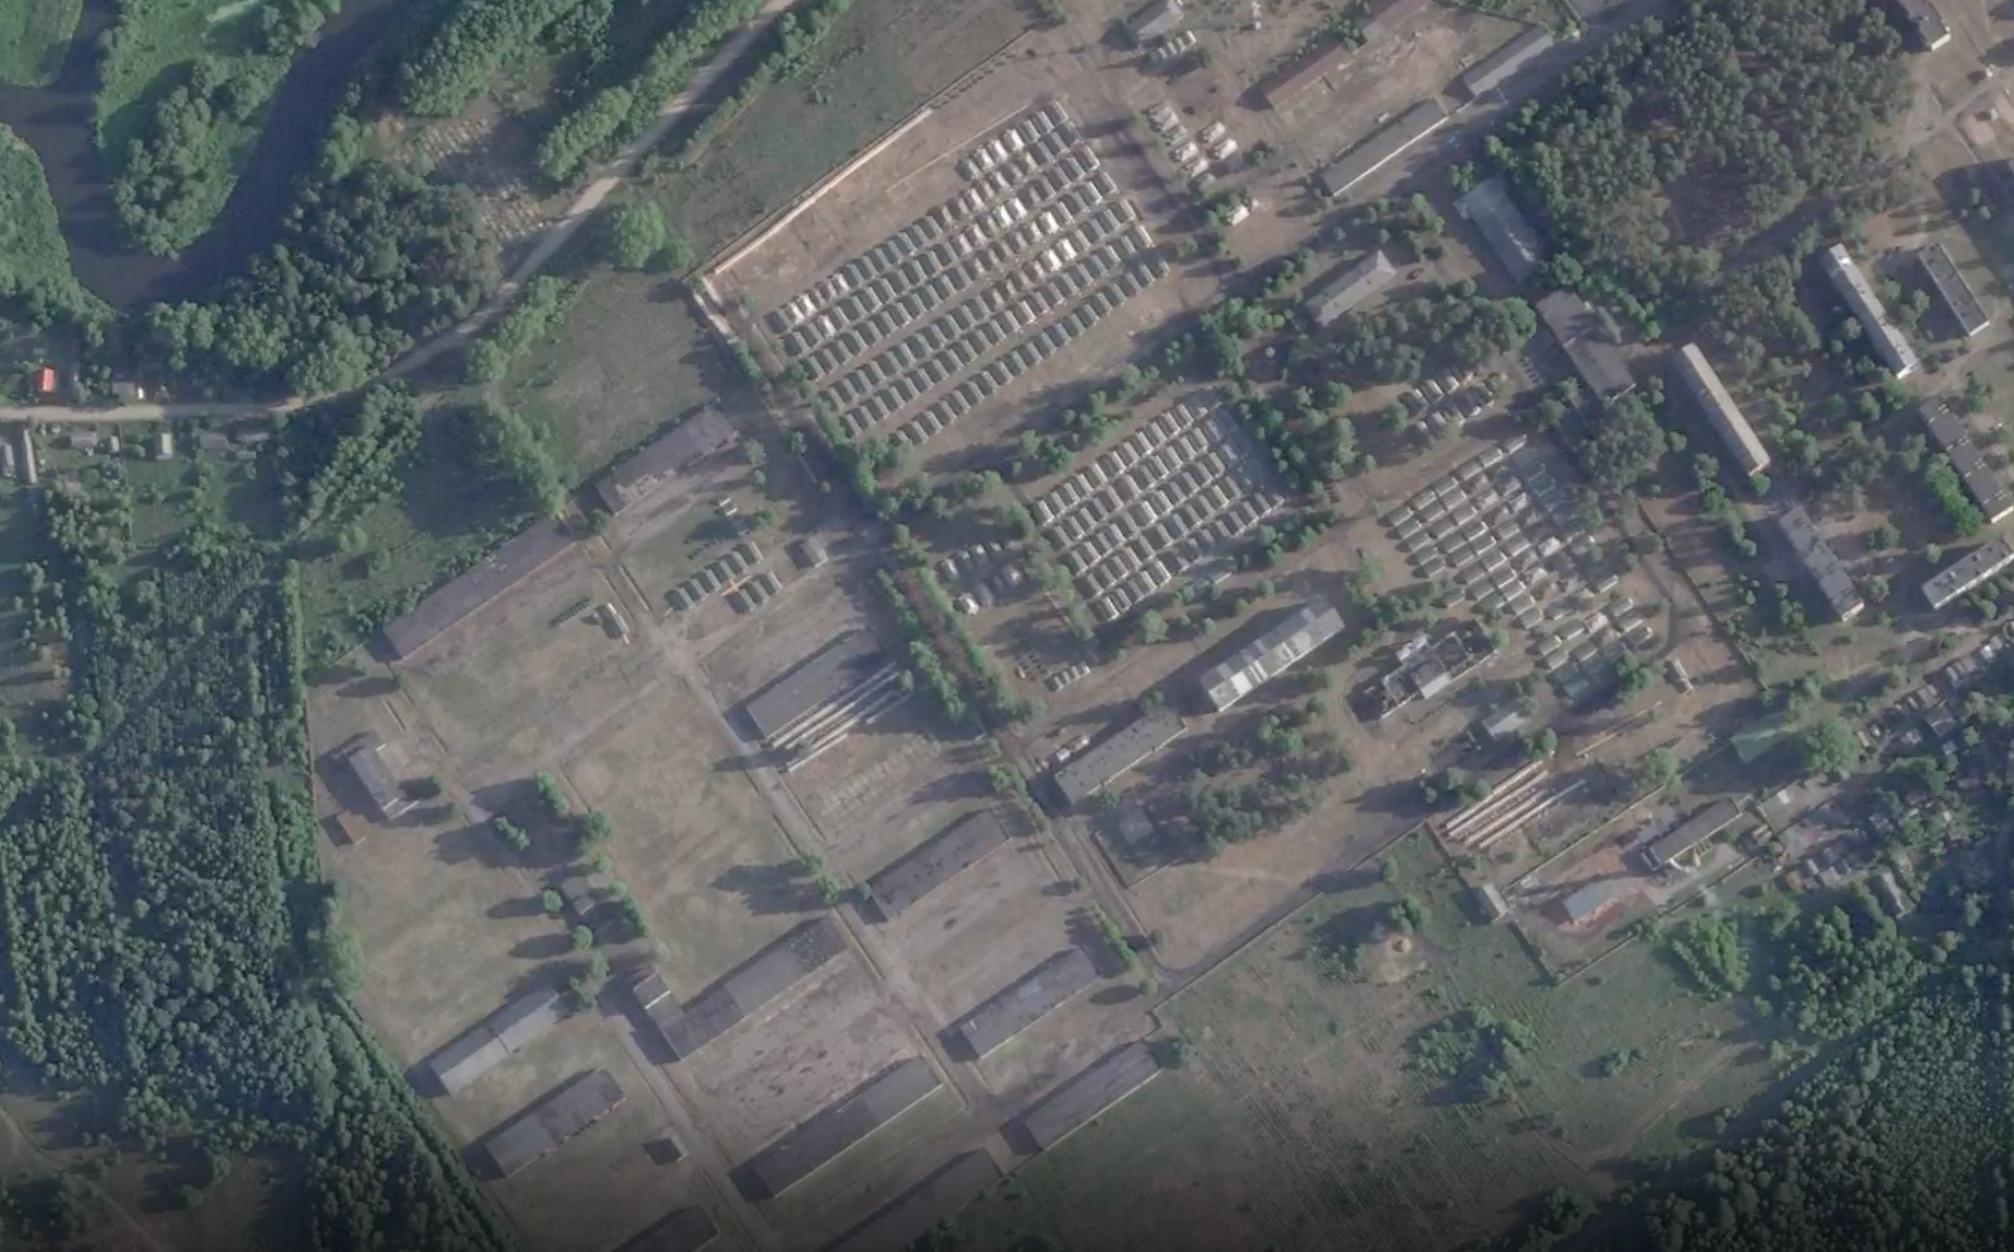 Satellite imagery shows what could be Wagner’s future camp in Belarus